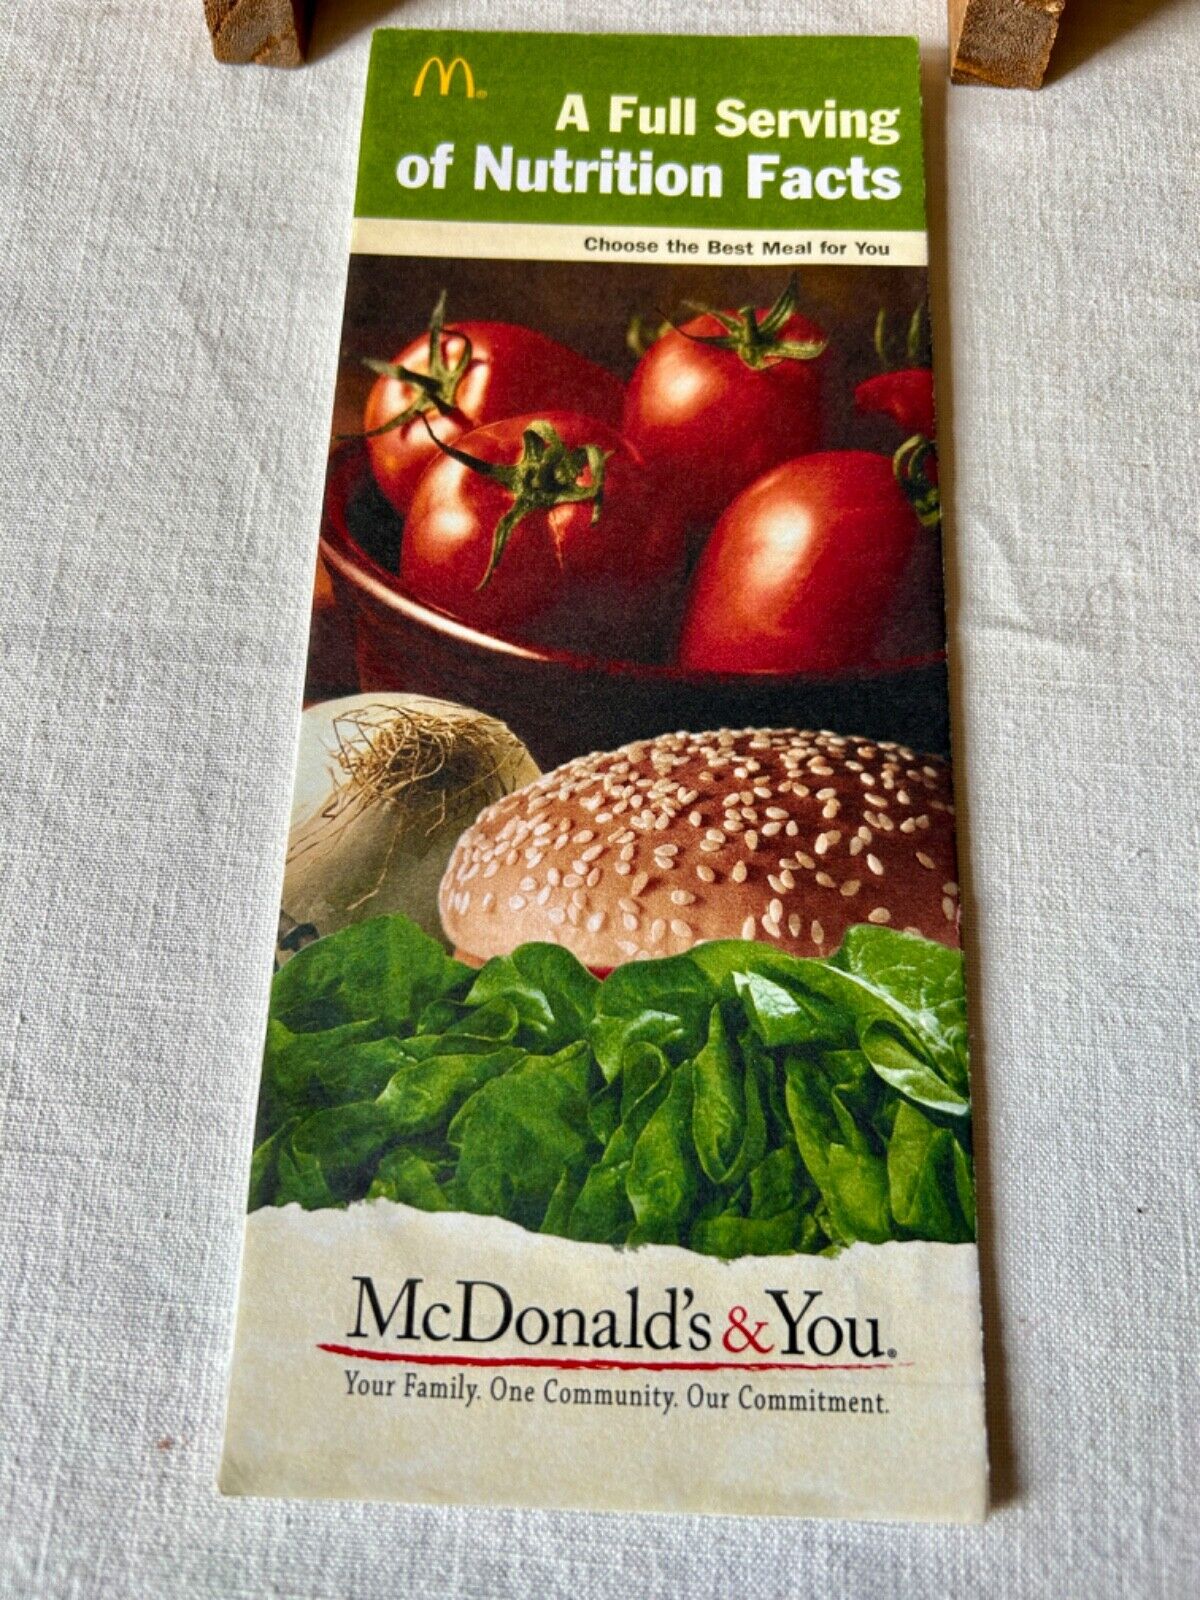 McDonald’s Nutrition Facts Pamphlet March 2004